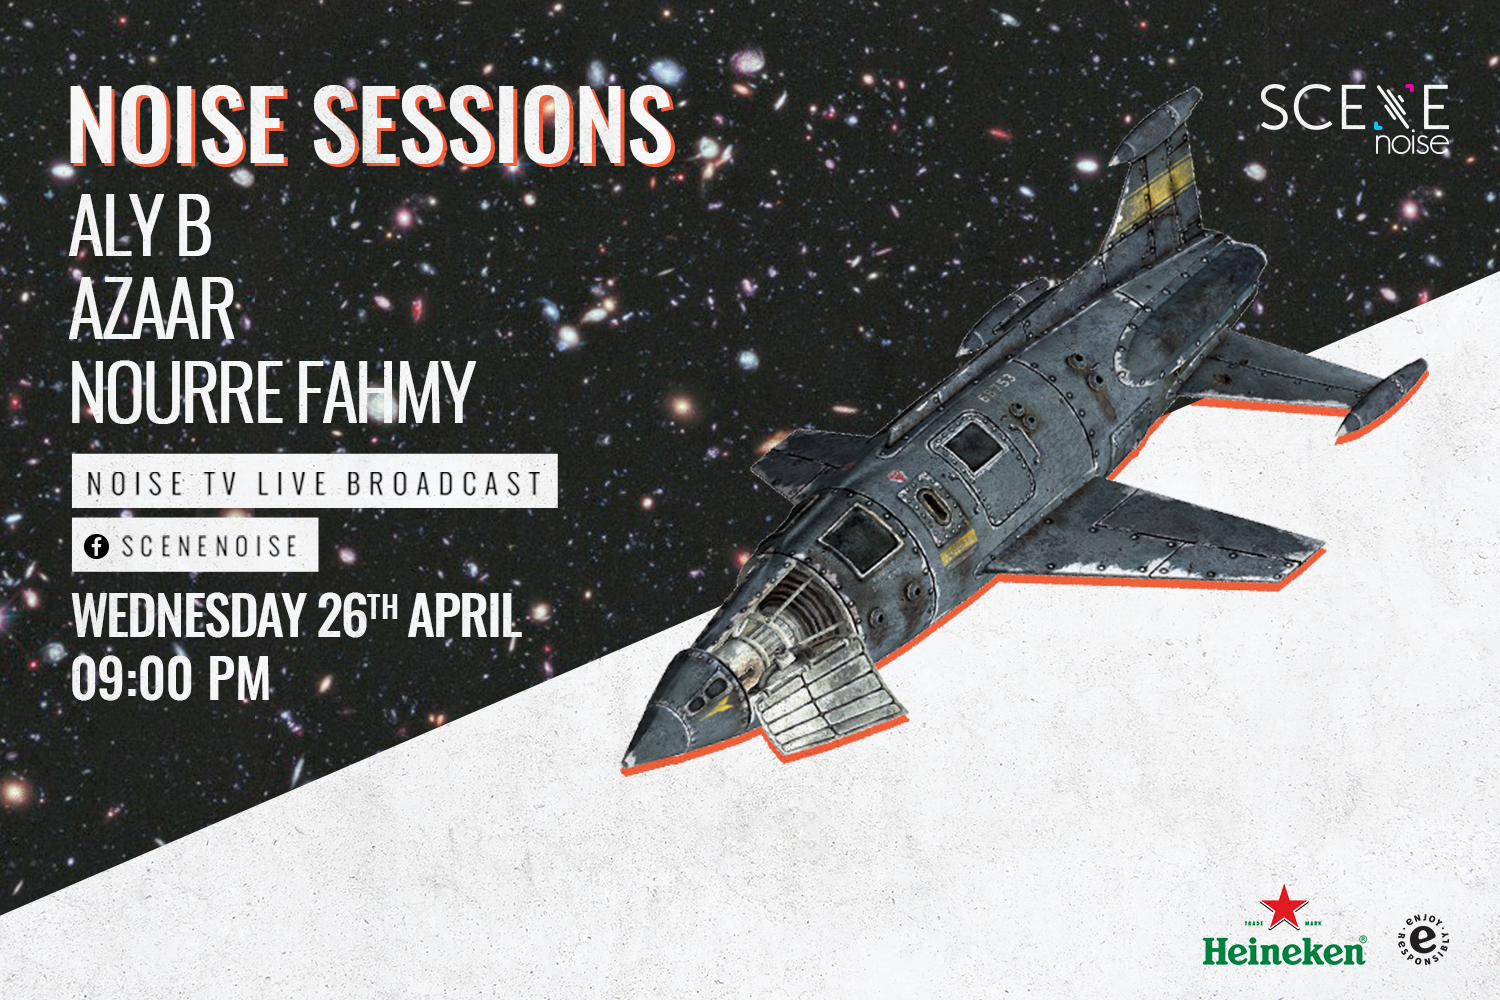 NoiseSessions Returns with Live Broadcast This Wednesday Ft. Aly B, Azaar and Nourre Fahmy